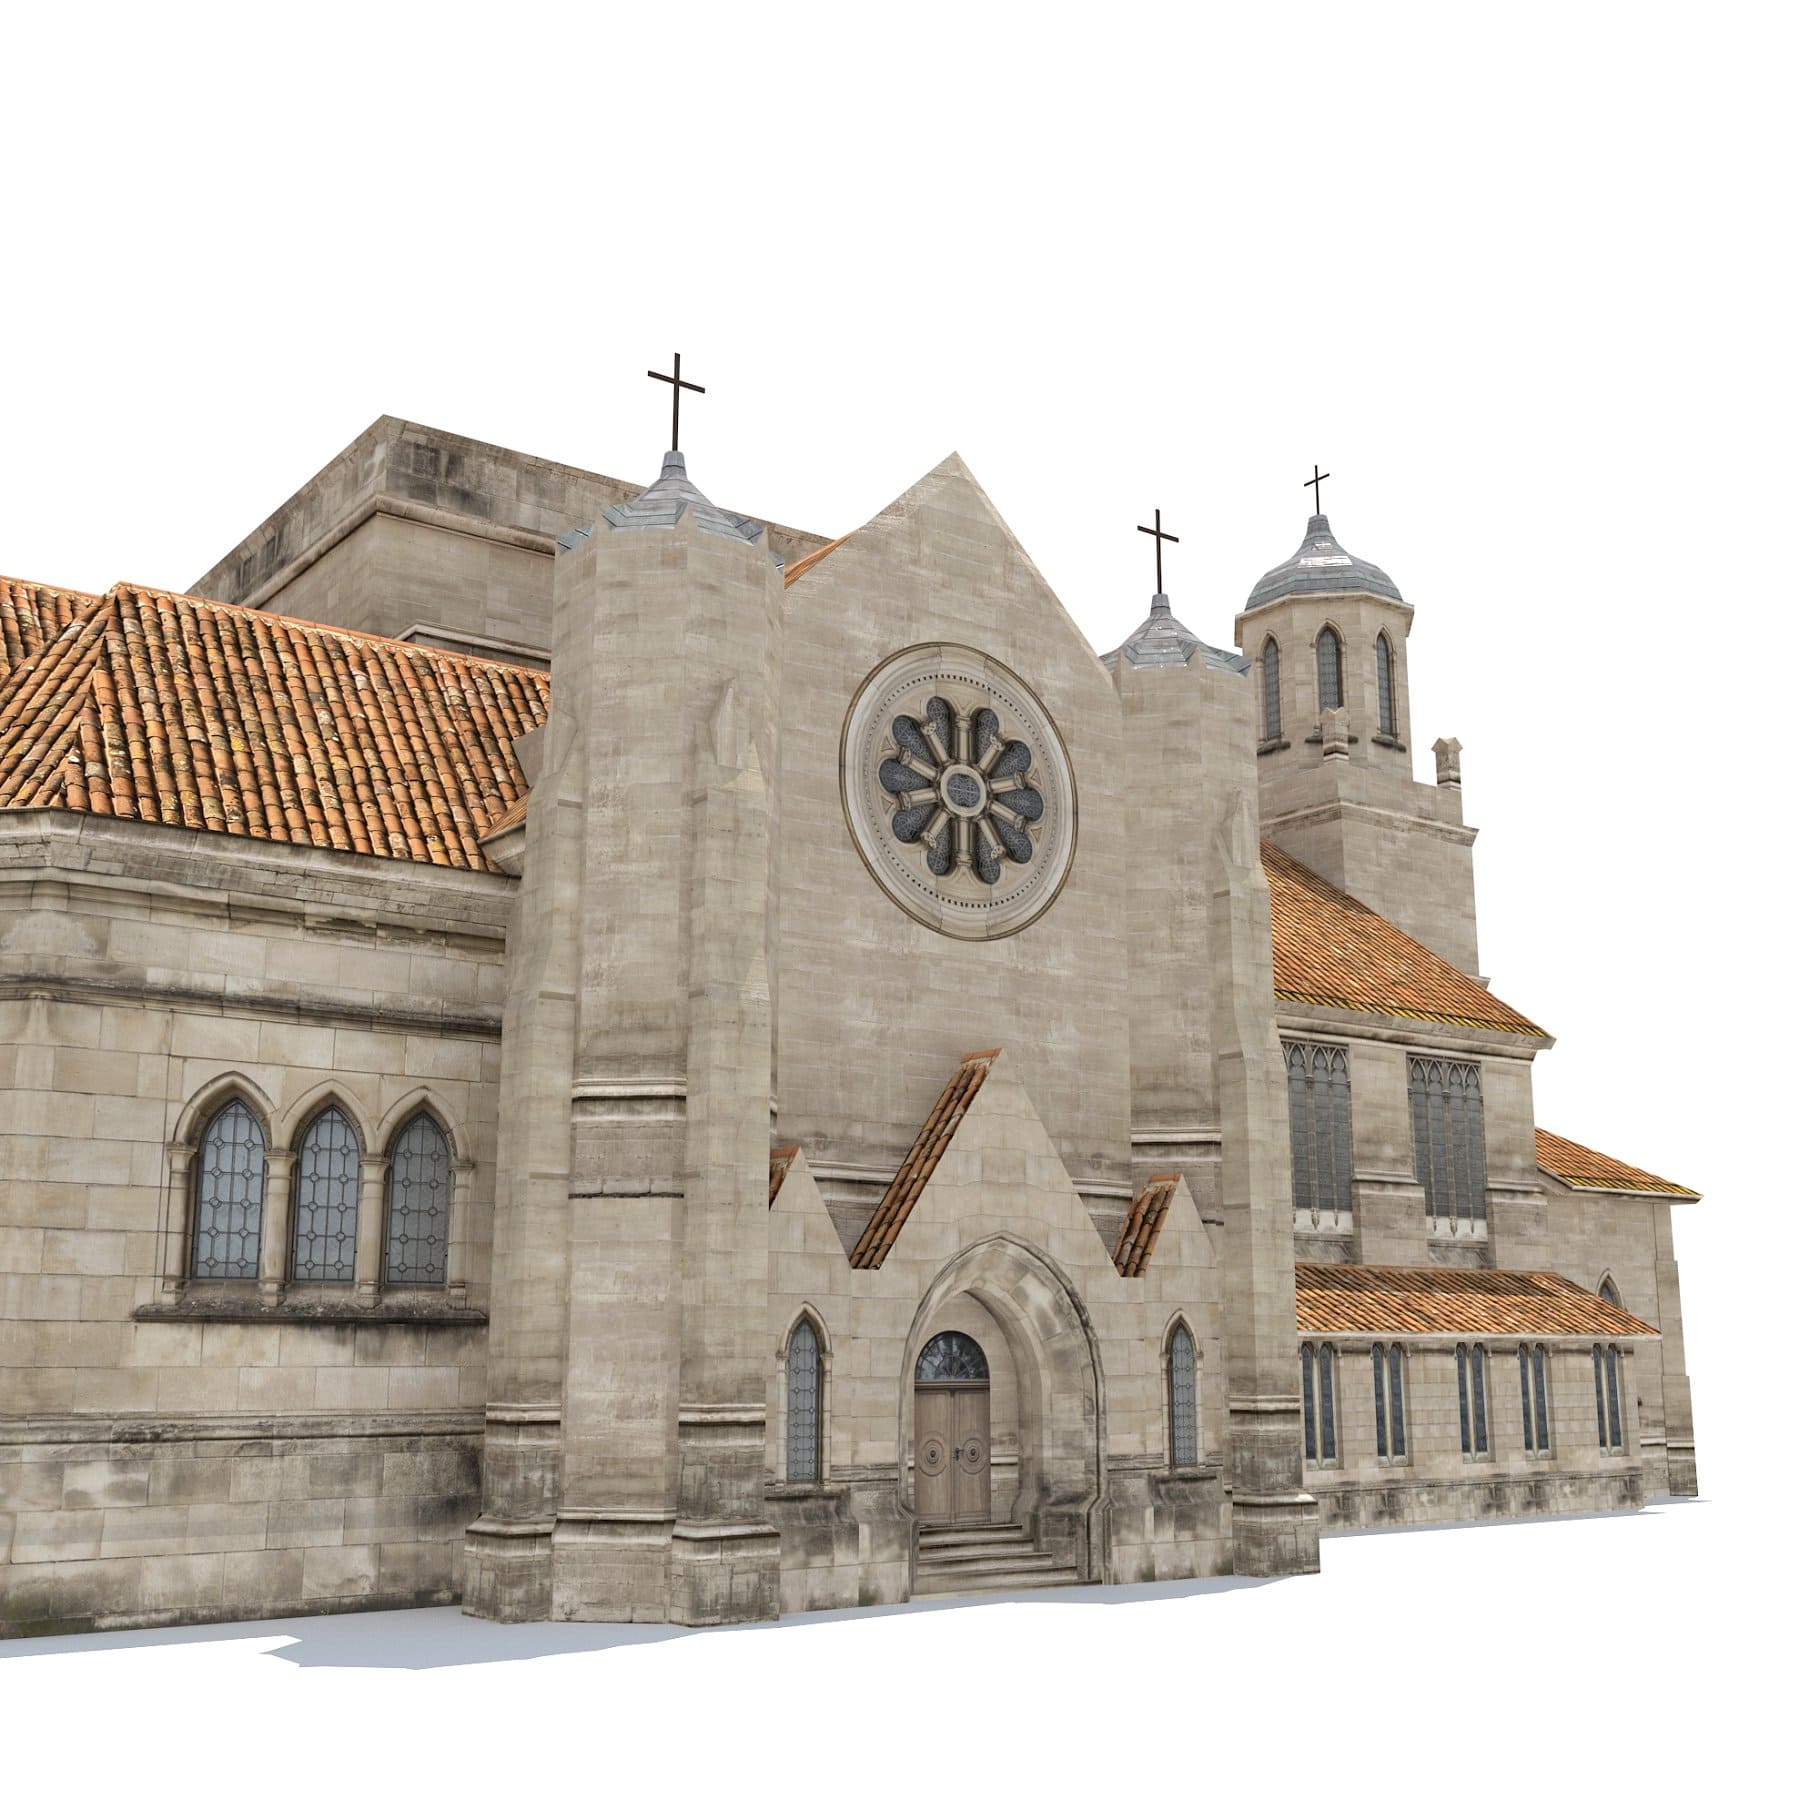 The church with decorative elements is displayed in the 3D model.